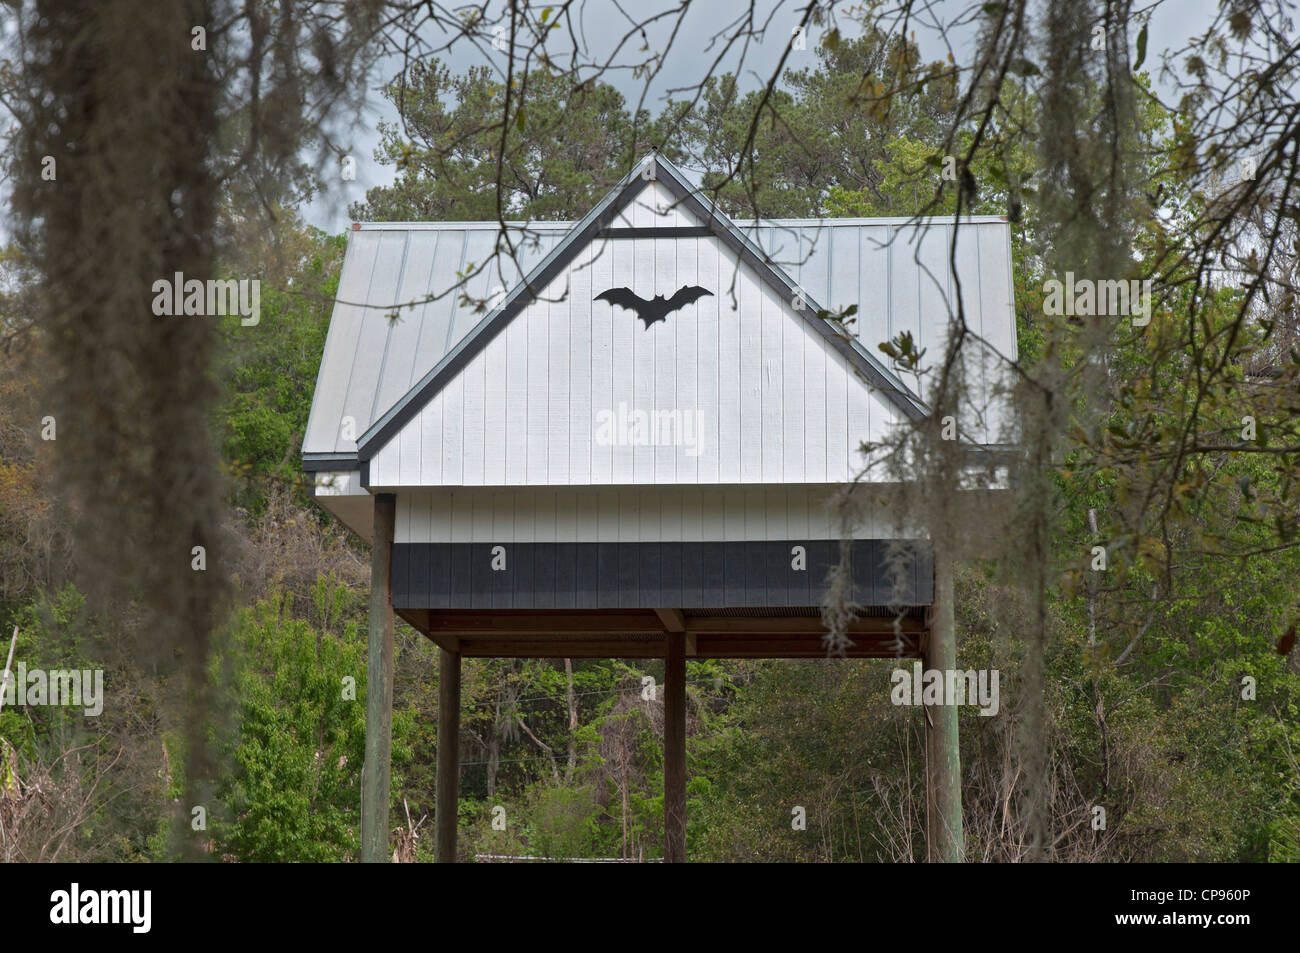 Bat house complex at the University of Florida Gainesville. Stock Photo